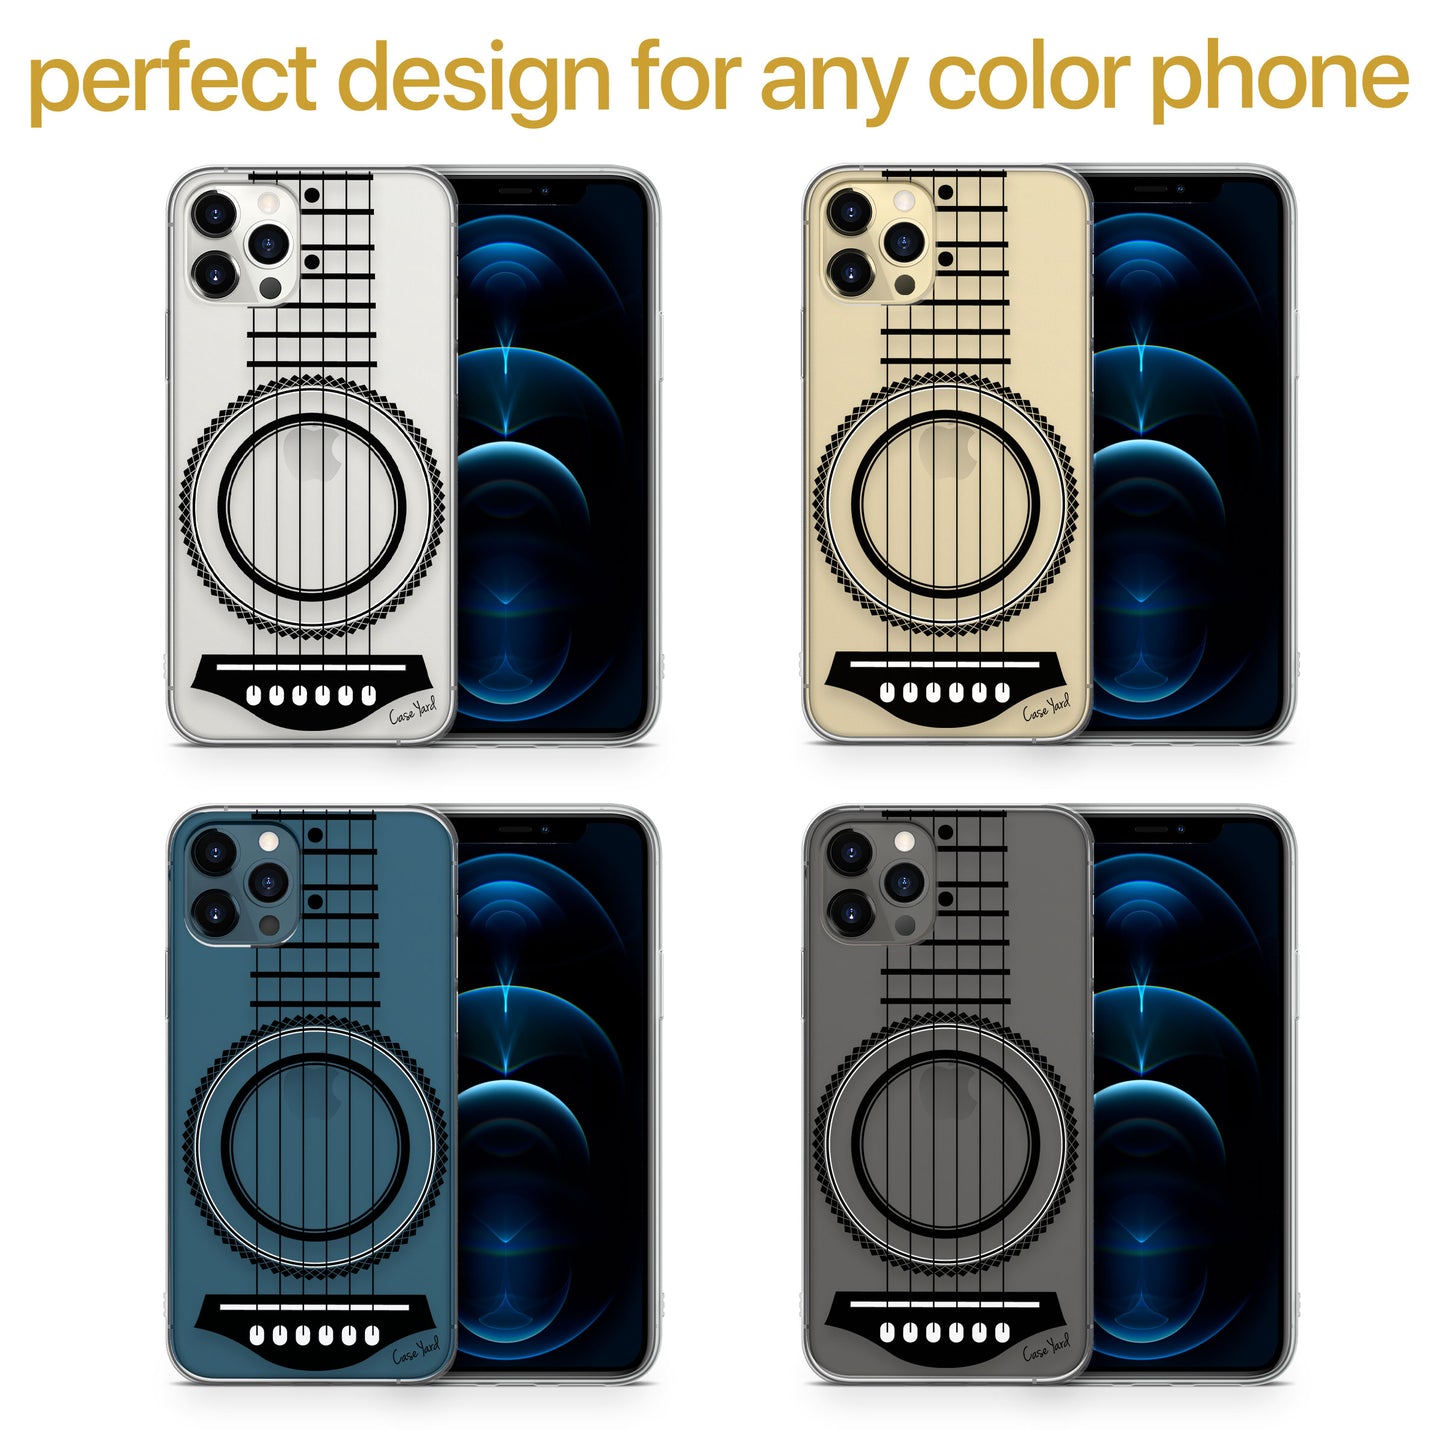 TPU Clear case with (Guitar) Design for iPhone & Samsung Phones